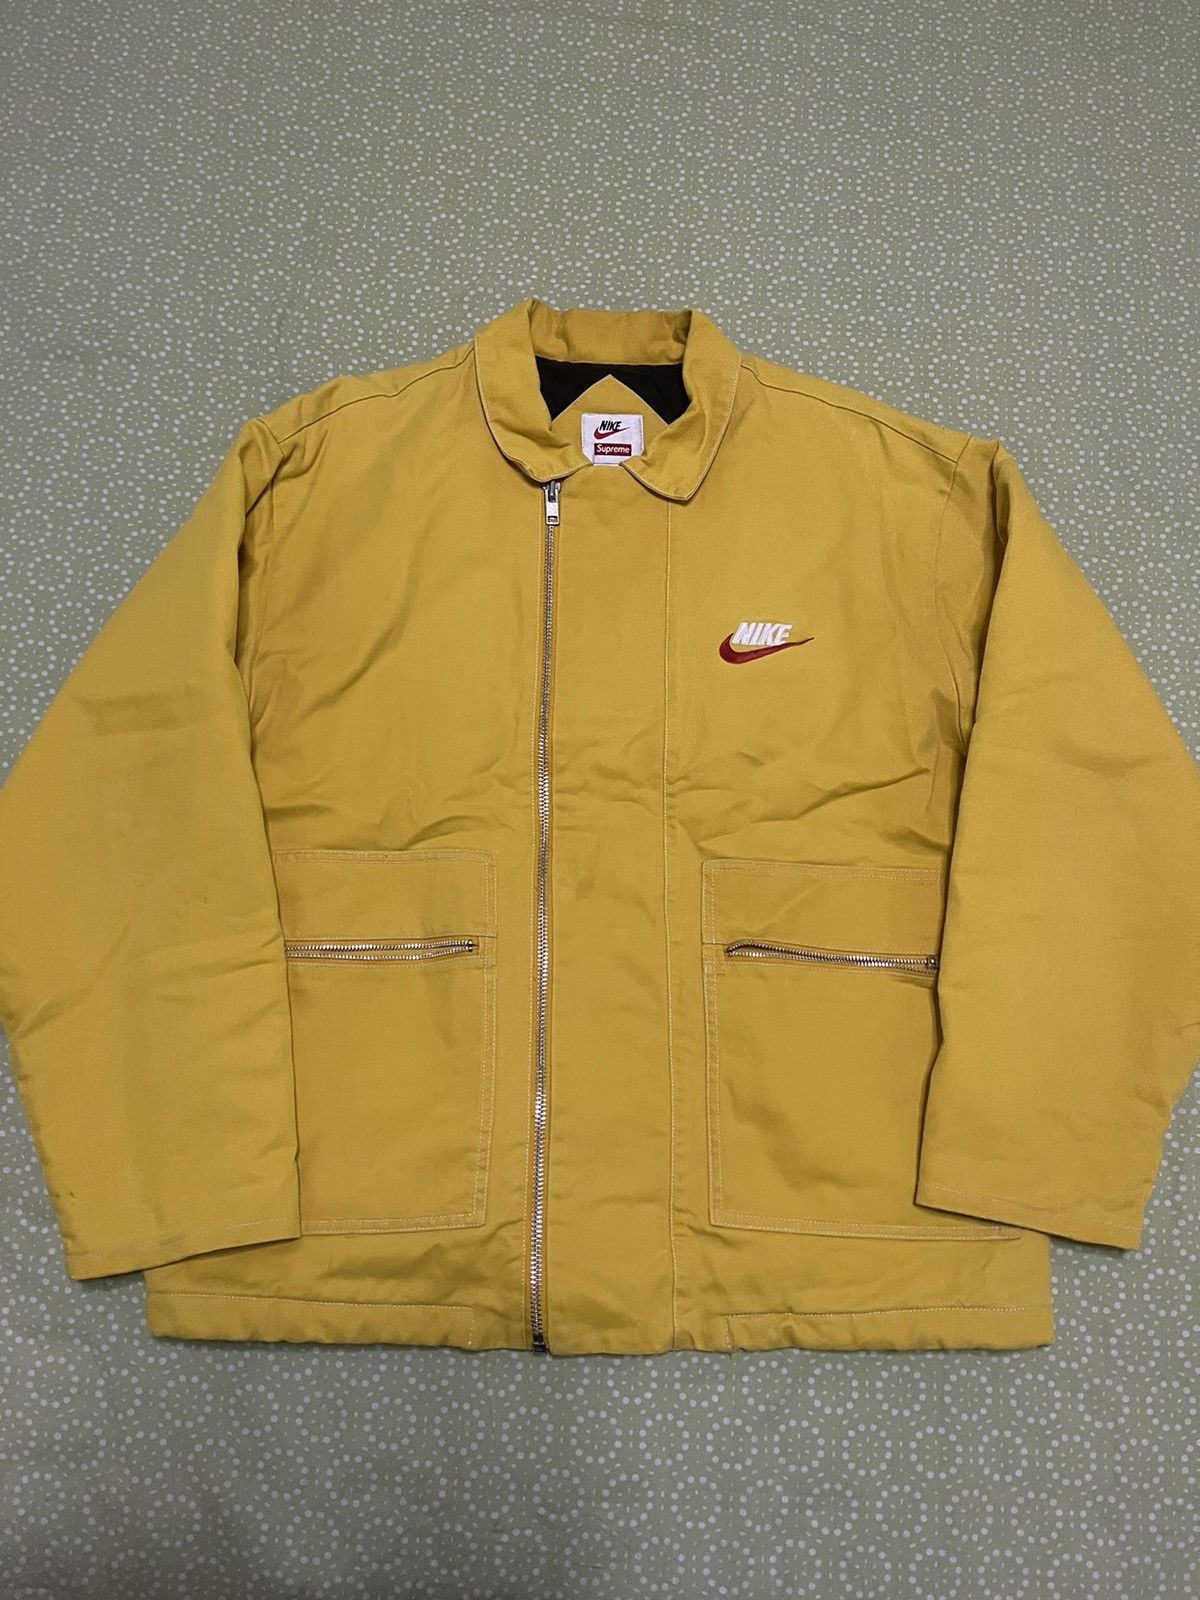 Nike Supreme Double Zip Quilted Work Jacket | Grailed